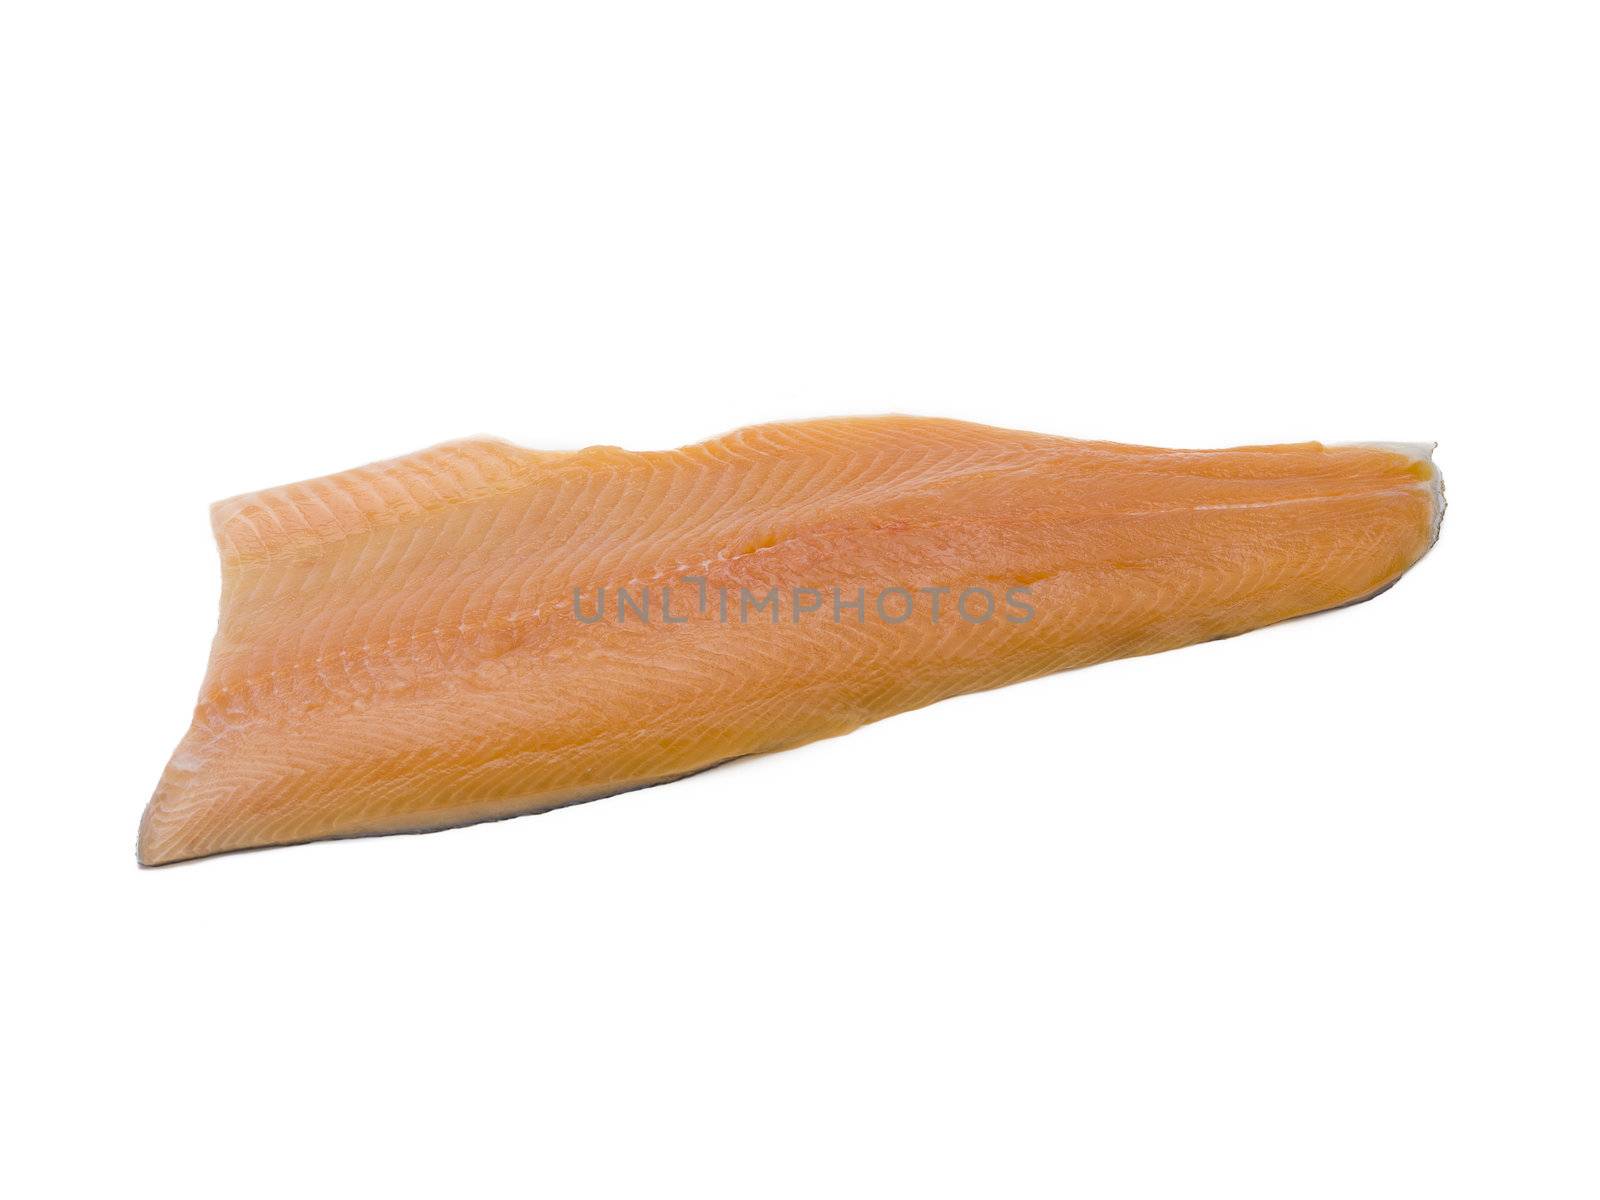 A slab of uncooked rainbow trout